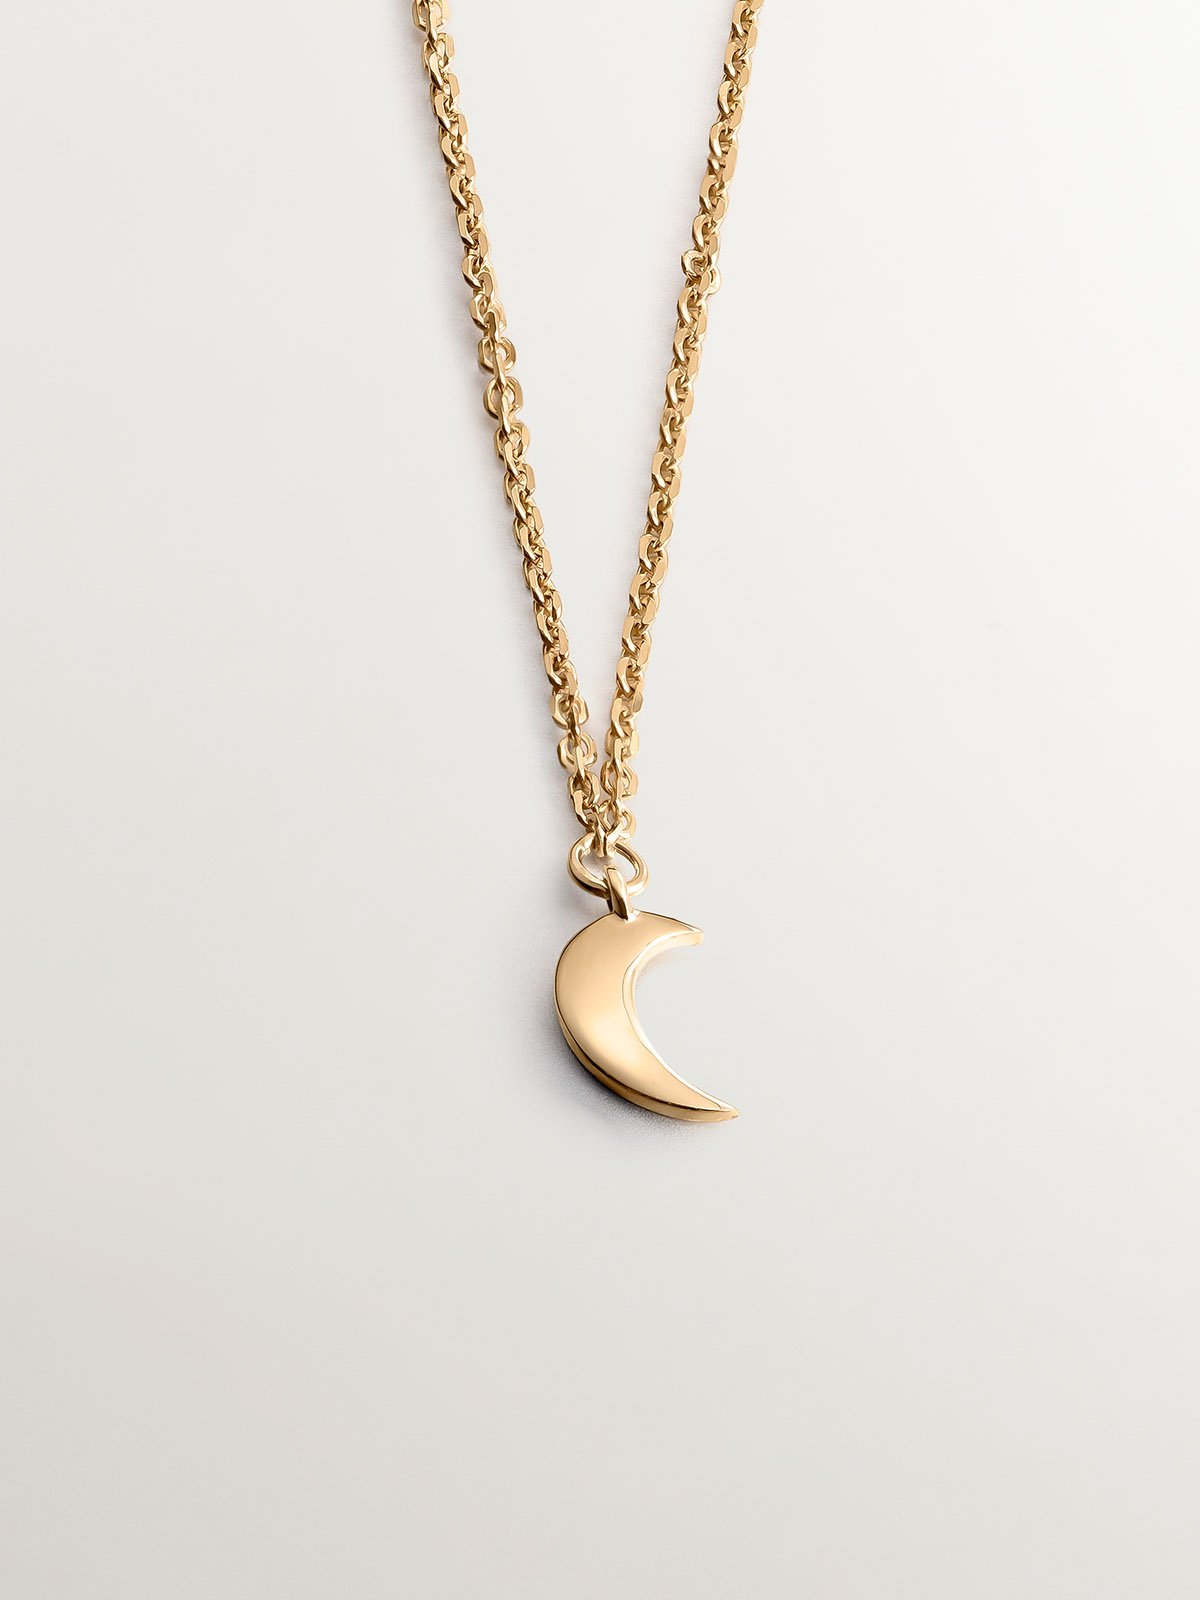 9K Yellow Gold Pendant with Moon